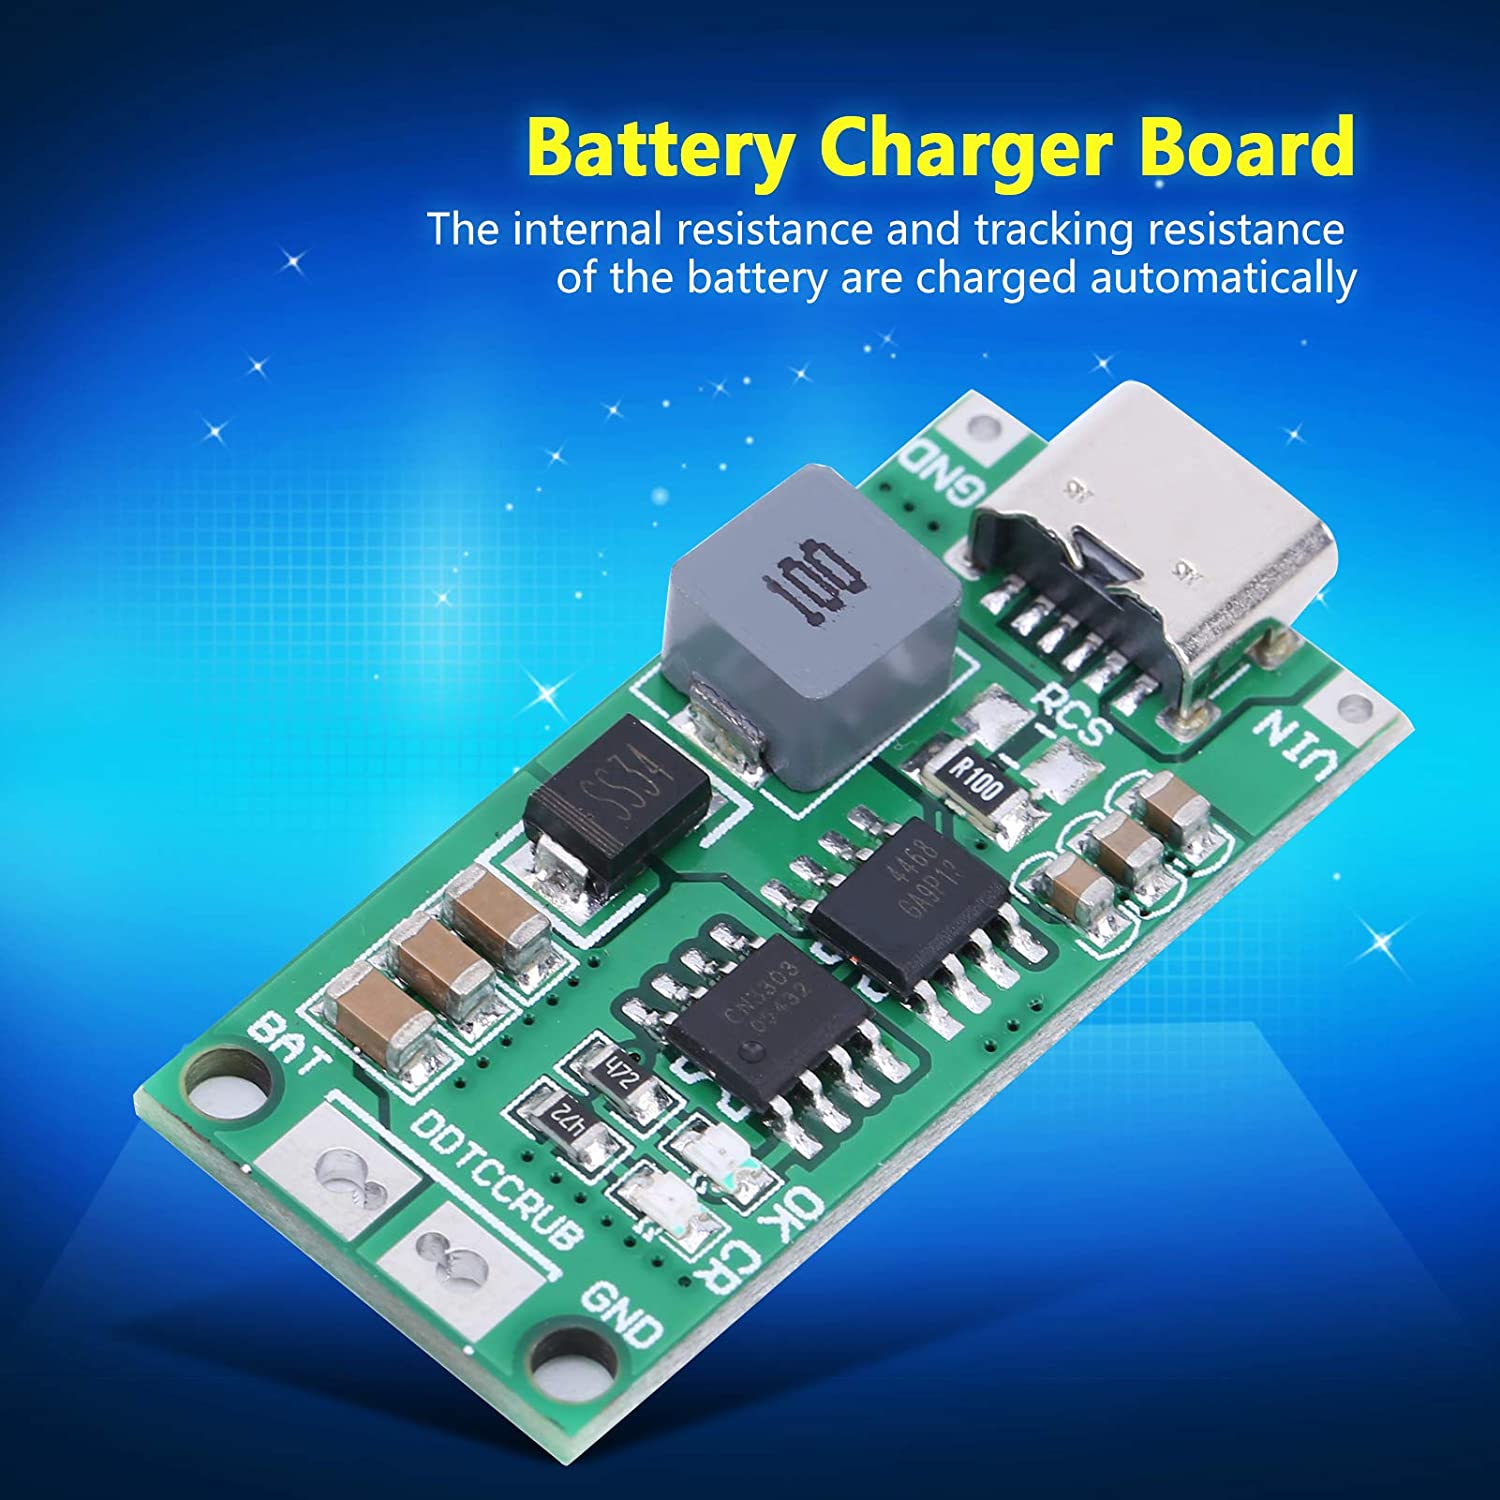 DDTCCRUB 4S‑1A Li-ion Battery Charging Module Step Up Boost Lithium Cell Charger